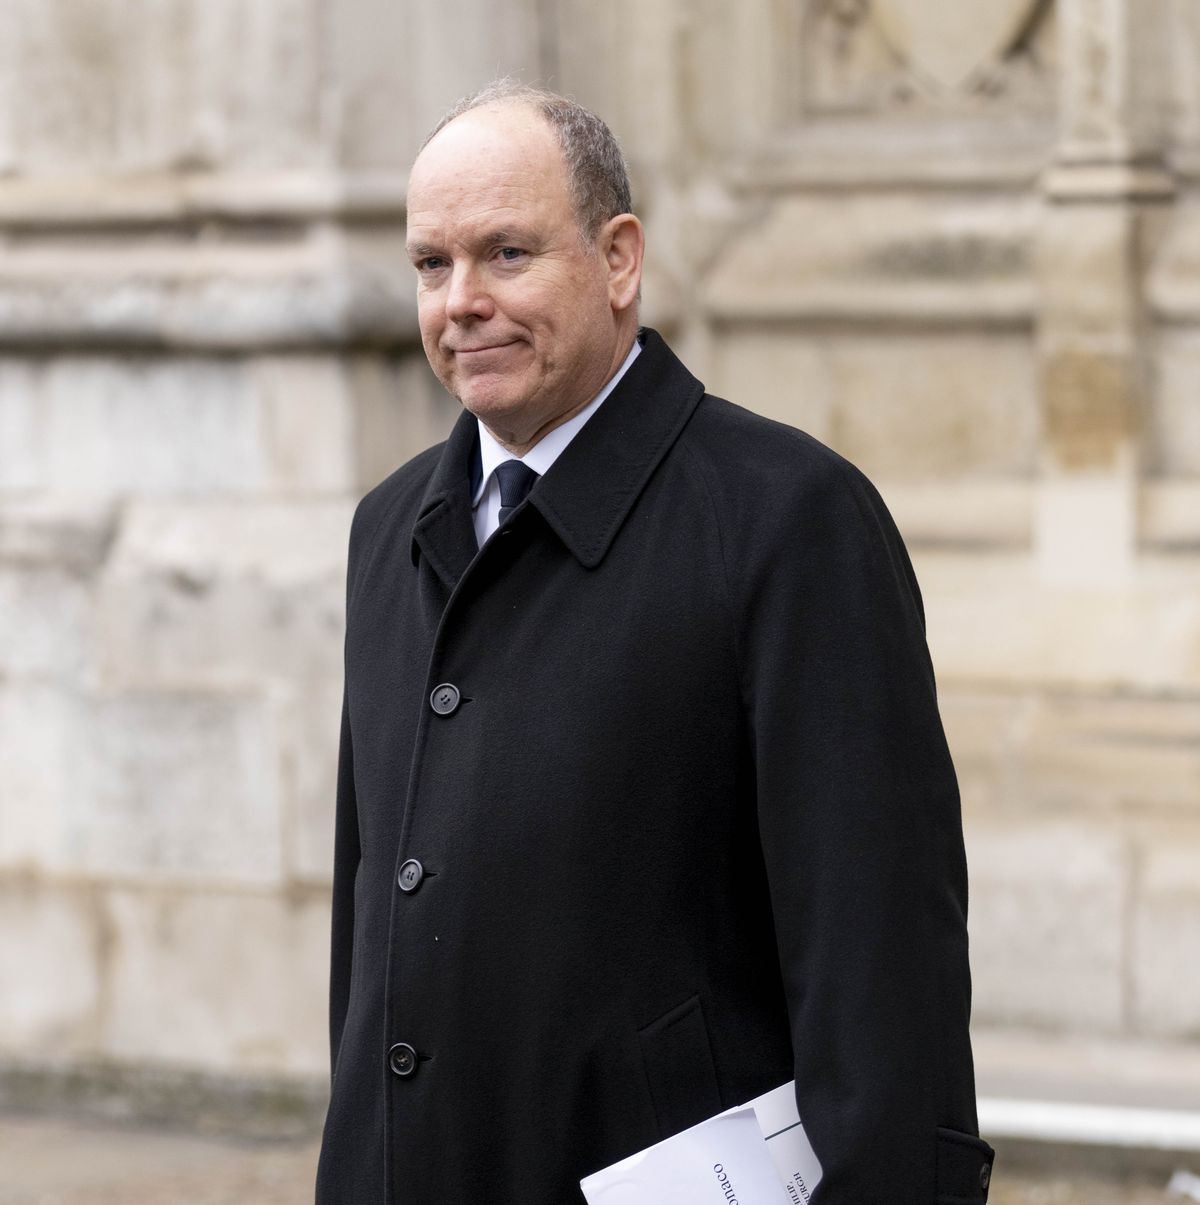 Prince Albert II at COP 28: We need to be much more ambitious